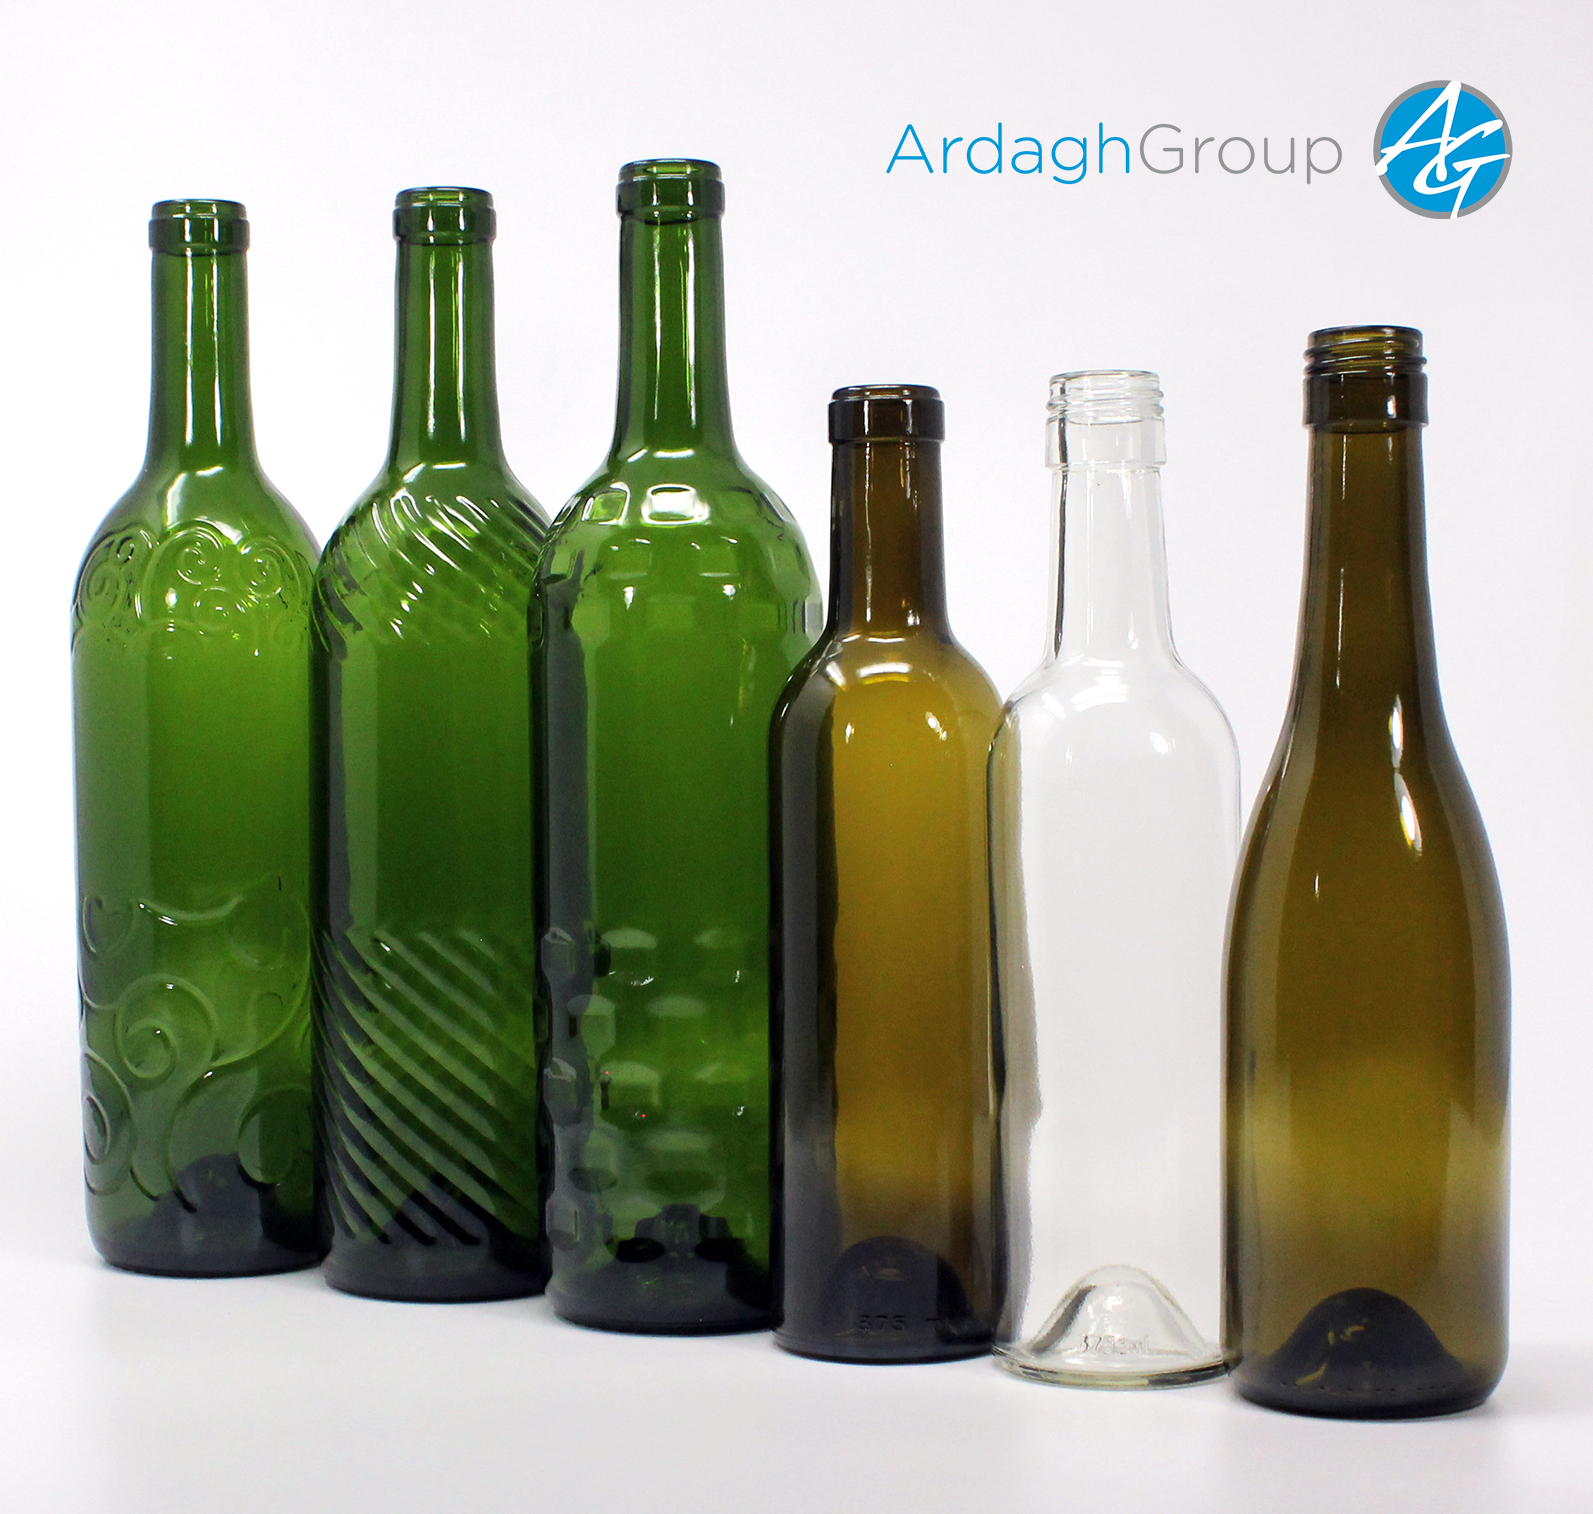 Aragh Group, Glass - North America, a business unit of Ardagh Group and the largest domestic manufacturer of glass bottles for the U.S. wine market, announced six new sophisticated glass wine bottle designs. An expansion of Ardagh’s extensive portfolio, the new designs include three new texture options, one 375ml Claret style bottle with a Stelvin® finish, one 375ml Claret style bottle with a cork finish and one 375ml Burgundy style bottle with a Stelvin® finish. To further engage today’s inquisitive consumer, Ardagh has developed three new textures that can be applied to a variety of bottles. Ardagh’s new REMO™, CUADRAS™ and VINA™ designs deliver an emotional connection to the consumer using unique shapes and textures, thus establishing a more interactive consumer experience. For wineries looking for single-serve options, Ardagh’s three new 375ml bottles provide the ability for consumers to mix-and-match varietals and sample products without committing to a multi-serve format. “Innovative bottle designs and single-serve packaging formats provide wineries with opportunities for differentiation in today’s market,” said John T Shaddox, Chief Commercial Officer for Ardagh’s North American Glass business unit. “Ardagh’s new glass wine bottle options leverage a modern, premium look and feel that respond to consumer interest.” Ardagh will showcase these six new glass wine bottle designs in booth #P2055 at next week’s Unified Wine & Grape Symposium at Cal Expo in Sacramento from Feb. 5-6, 2020. For more than 125 years, Ardagh has been producing 100 percent and endlessly recyclable glass bottles in the U.S. and offers a wide selection of premium wine bottles in a variety of colours, sizes, styles and finishes. Ardagh produces glass wine bottles from its glass production facilities located in the heart of the major wine-producing areas in North America. Ardagh have experience in creating exceptional wine bottles with star qualities, click here for more information. Ardagh is dedicated to the wine market with capabilities and resources to grow with wineries every step of the way. For wine bottles in less than truckload (LTL) or truckload quantities, customers can contact Ardagh directly at 707-200-9350 (West) or 317-558-1585 (Central/East) or marketing.glass.na@ardaghgroup.com. Ardagh Group introduces new sophisticated glass wine bottle designs